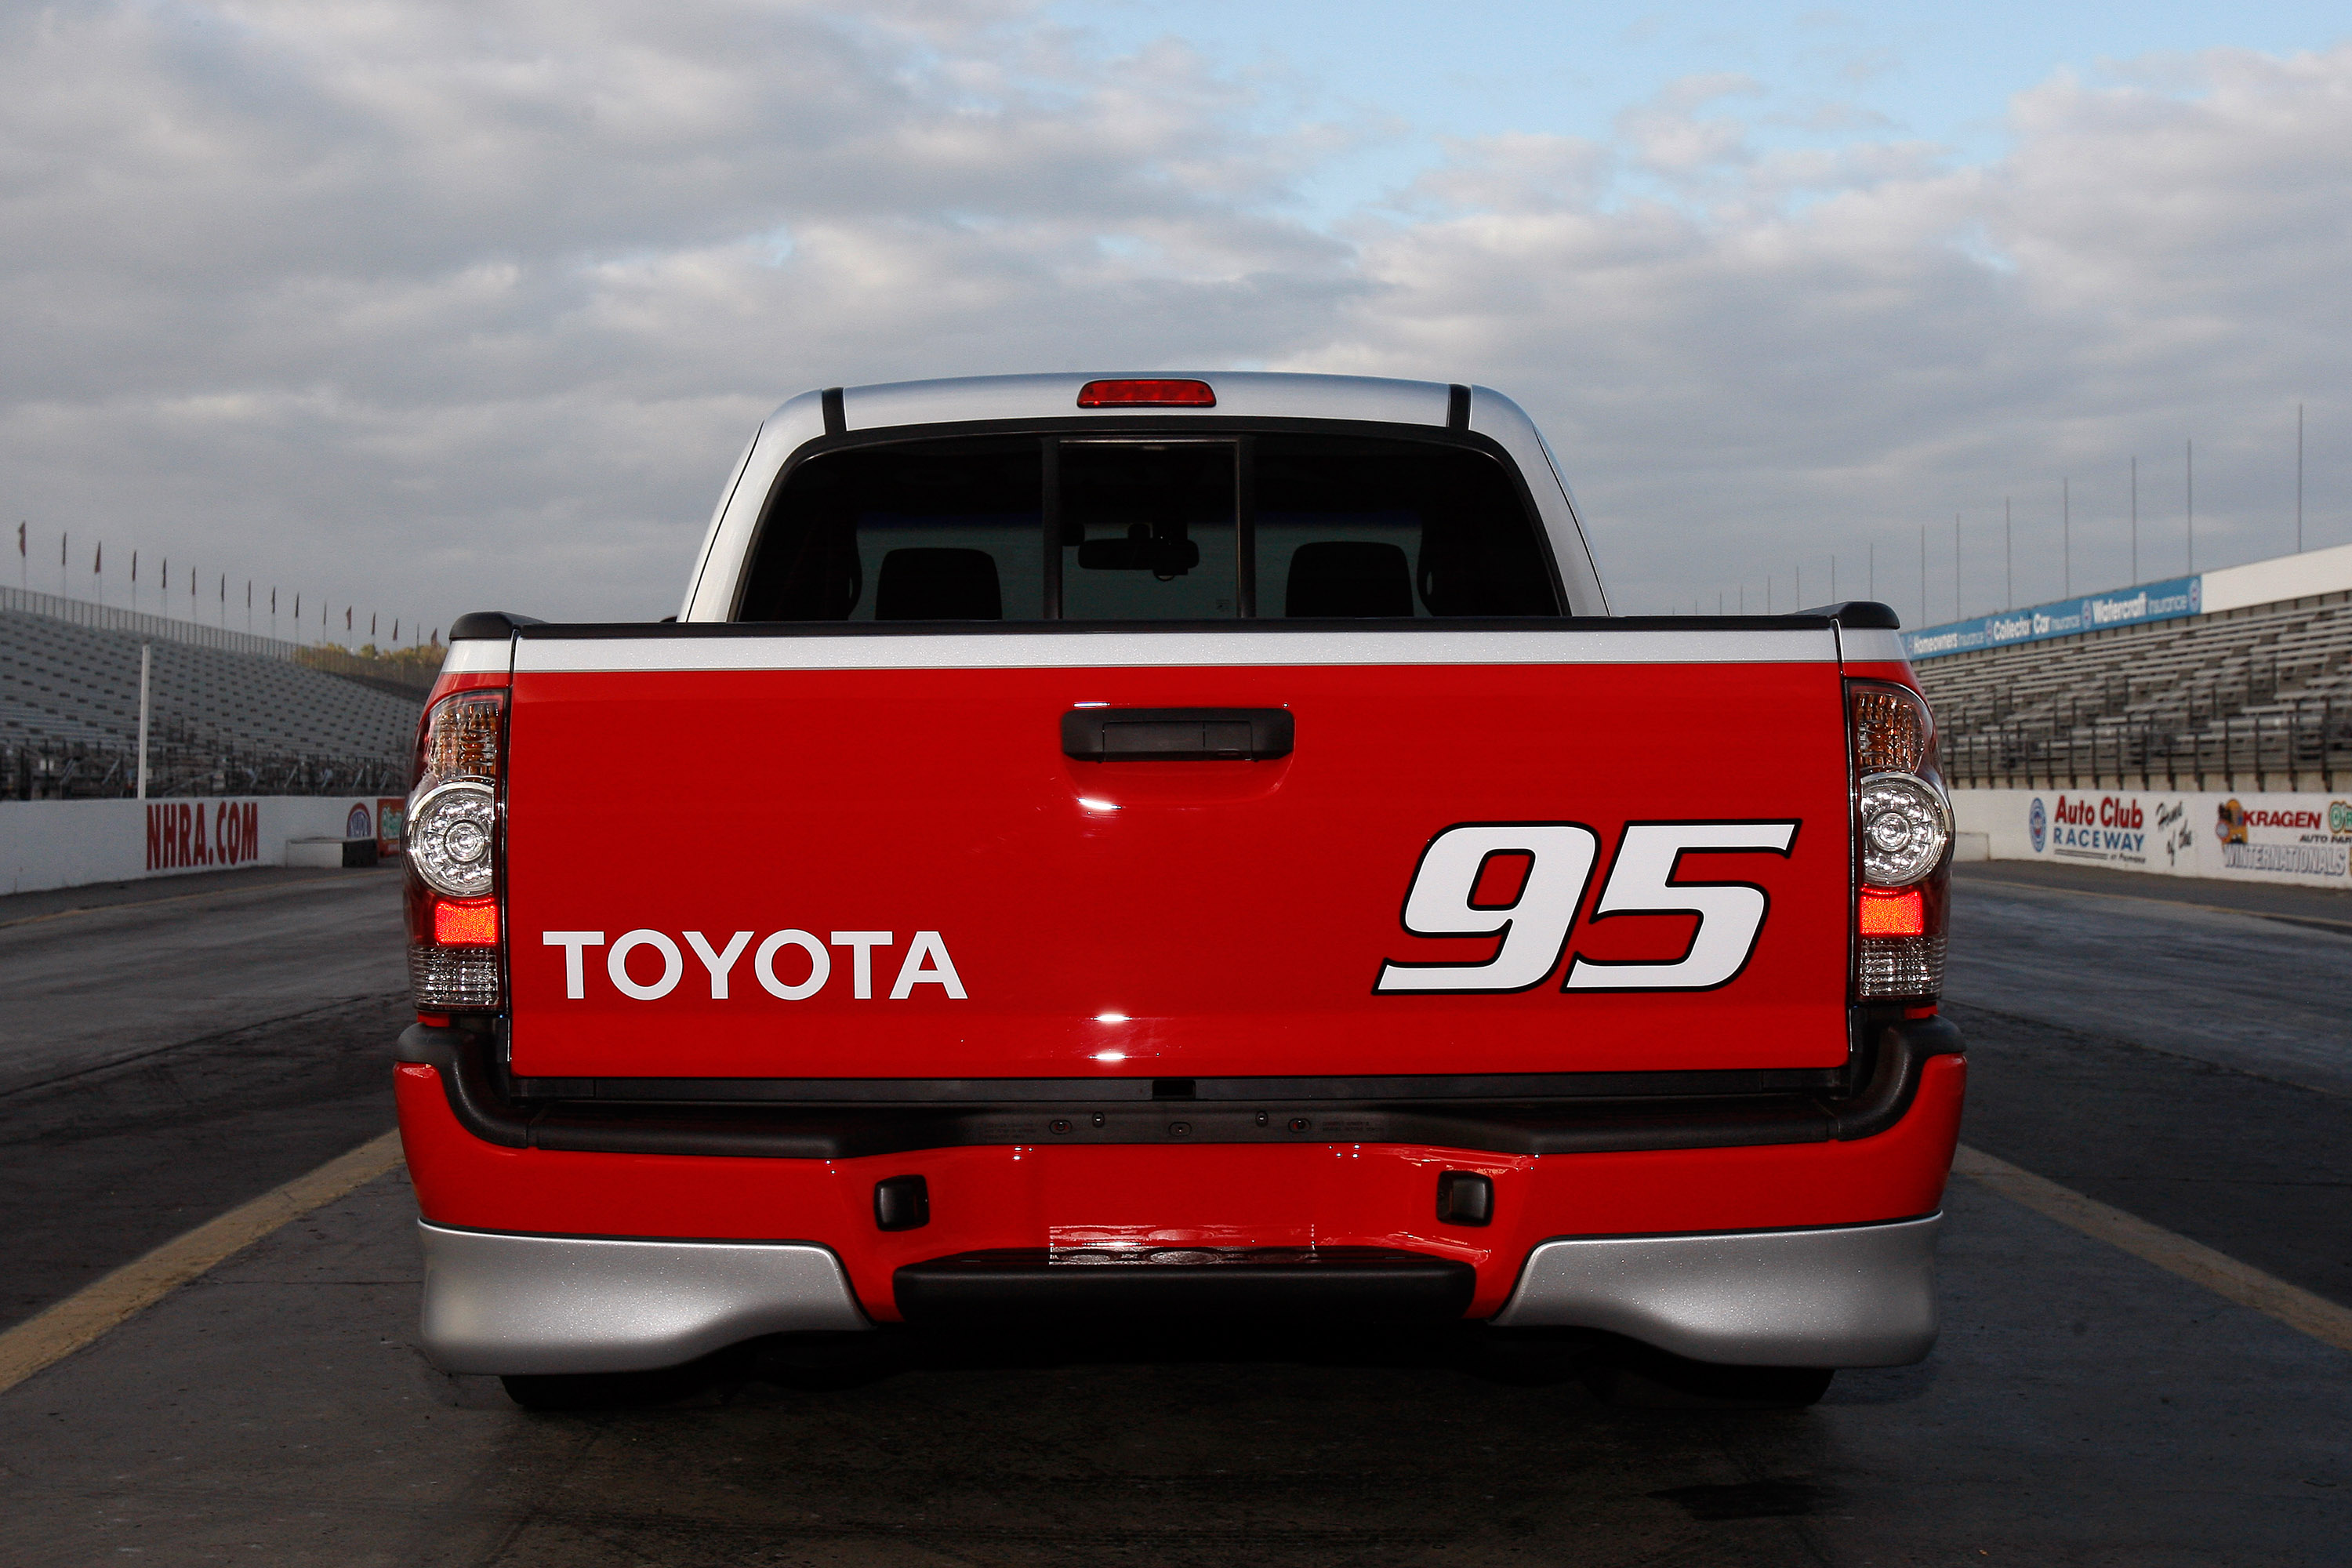 Toyota Tacoma X Runner Rtr Ready To Race To Hit Sema 10